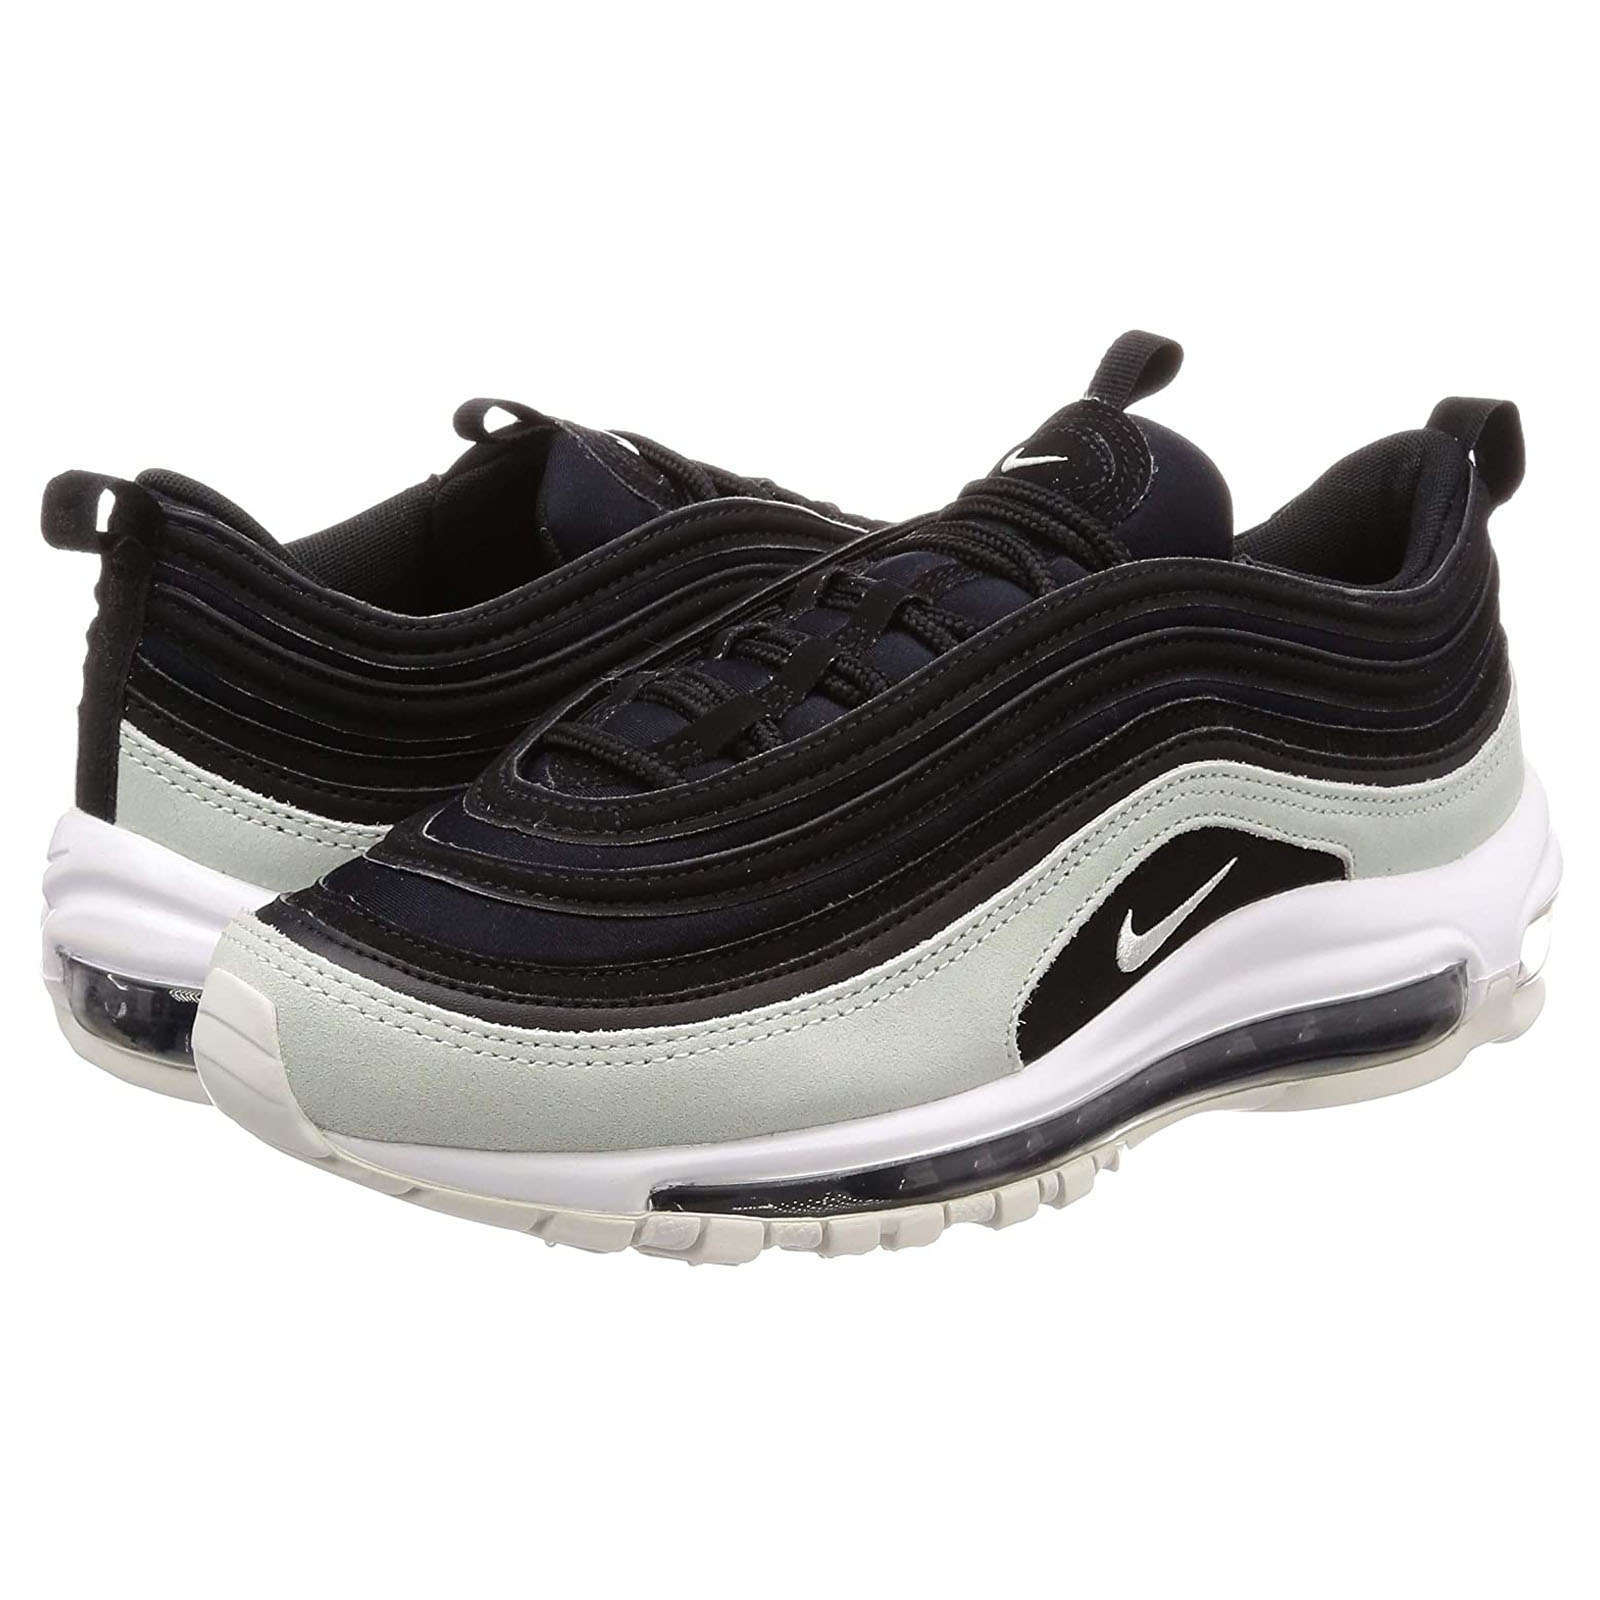 Nike Air Max 97 PRM Textile Leather Synthetic Women's Low-Top Sneakers#color_black spuce aura